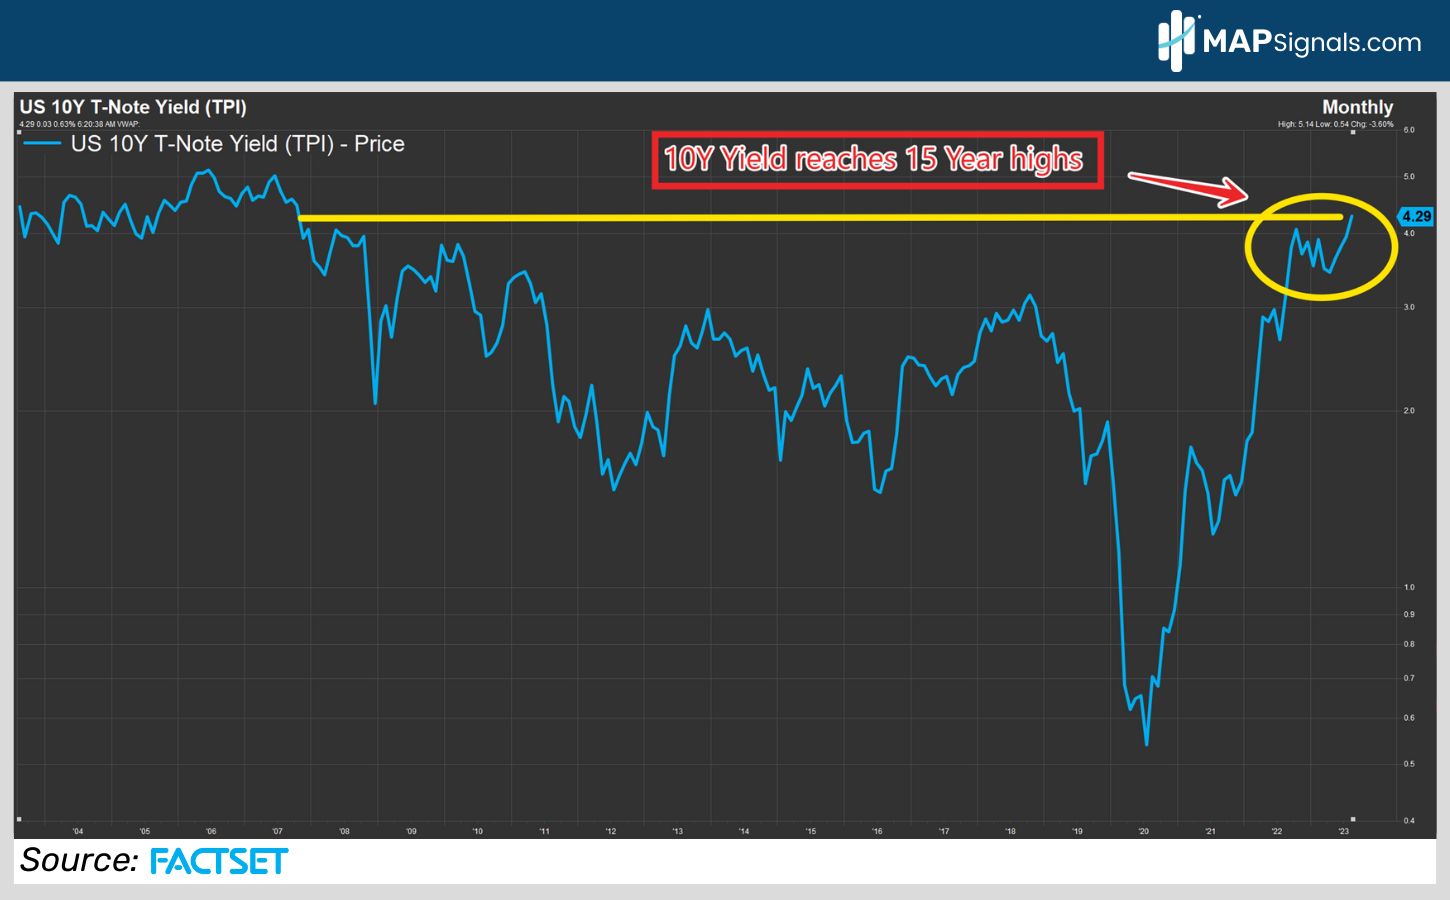 US 10Y T-Note Yield (TPI) | FactSet | MAPsignals